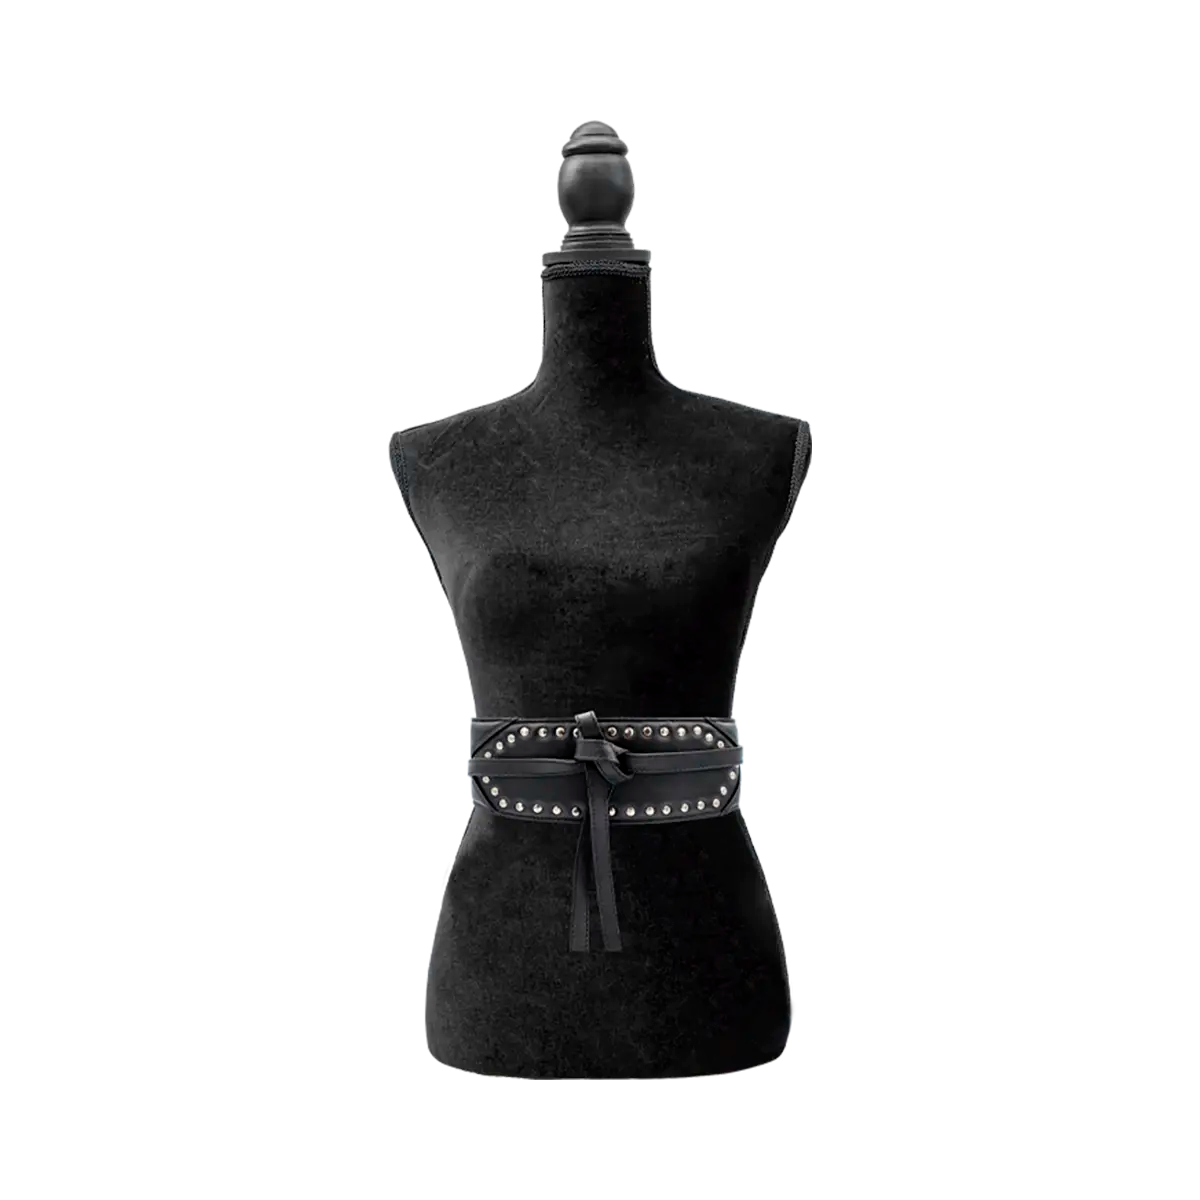 leather black studded Wrap-Around Belt For Women. Fashionable accessories for women. Shop in San Diego, CA.